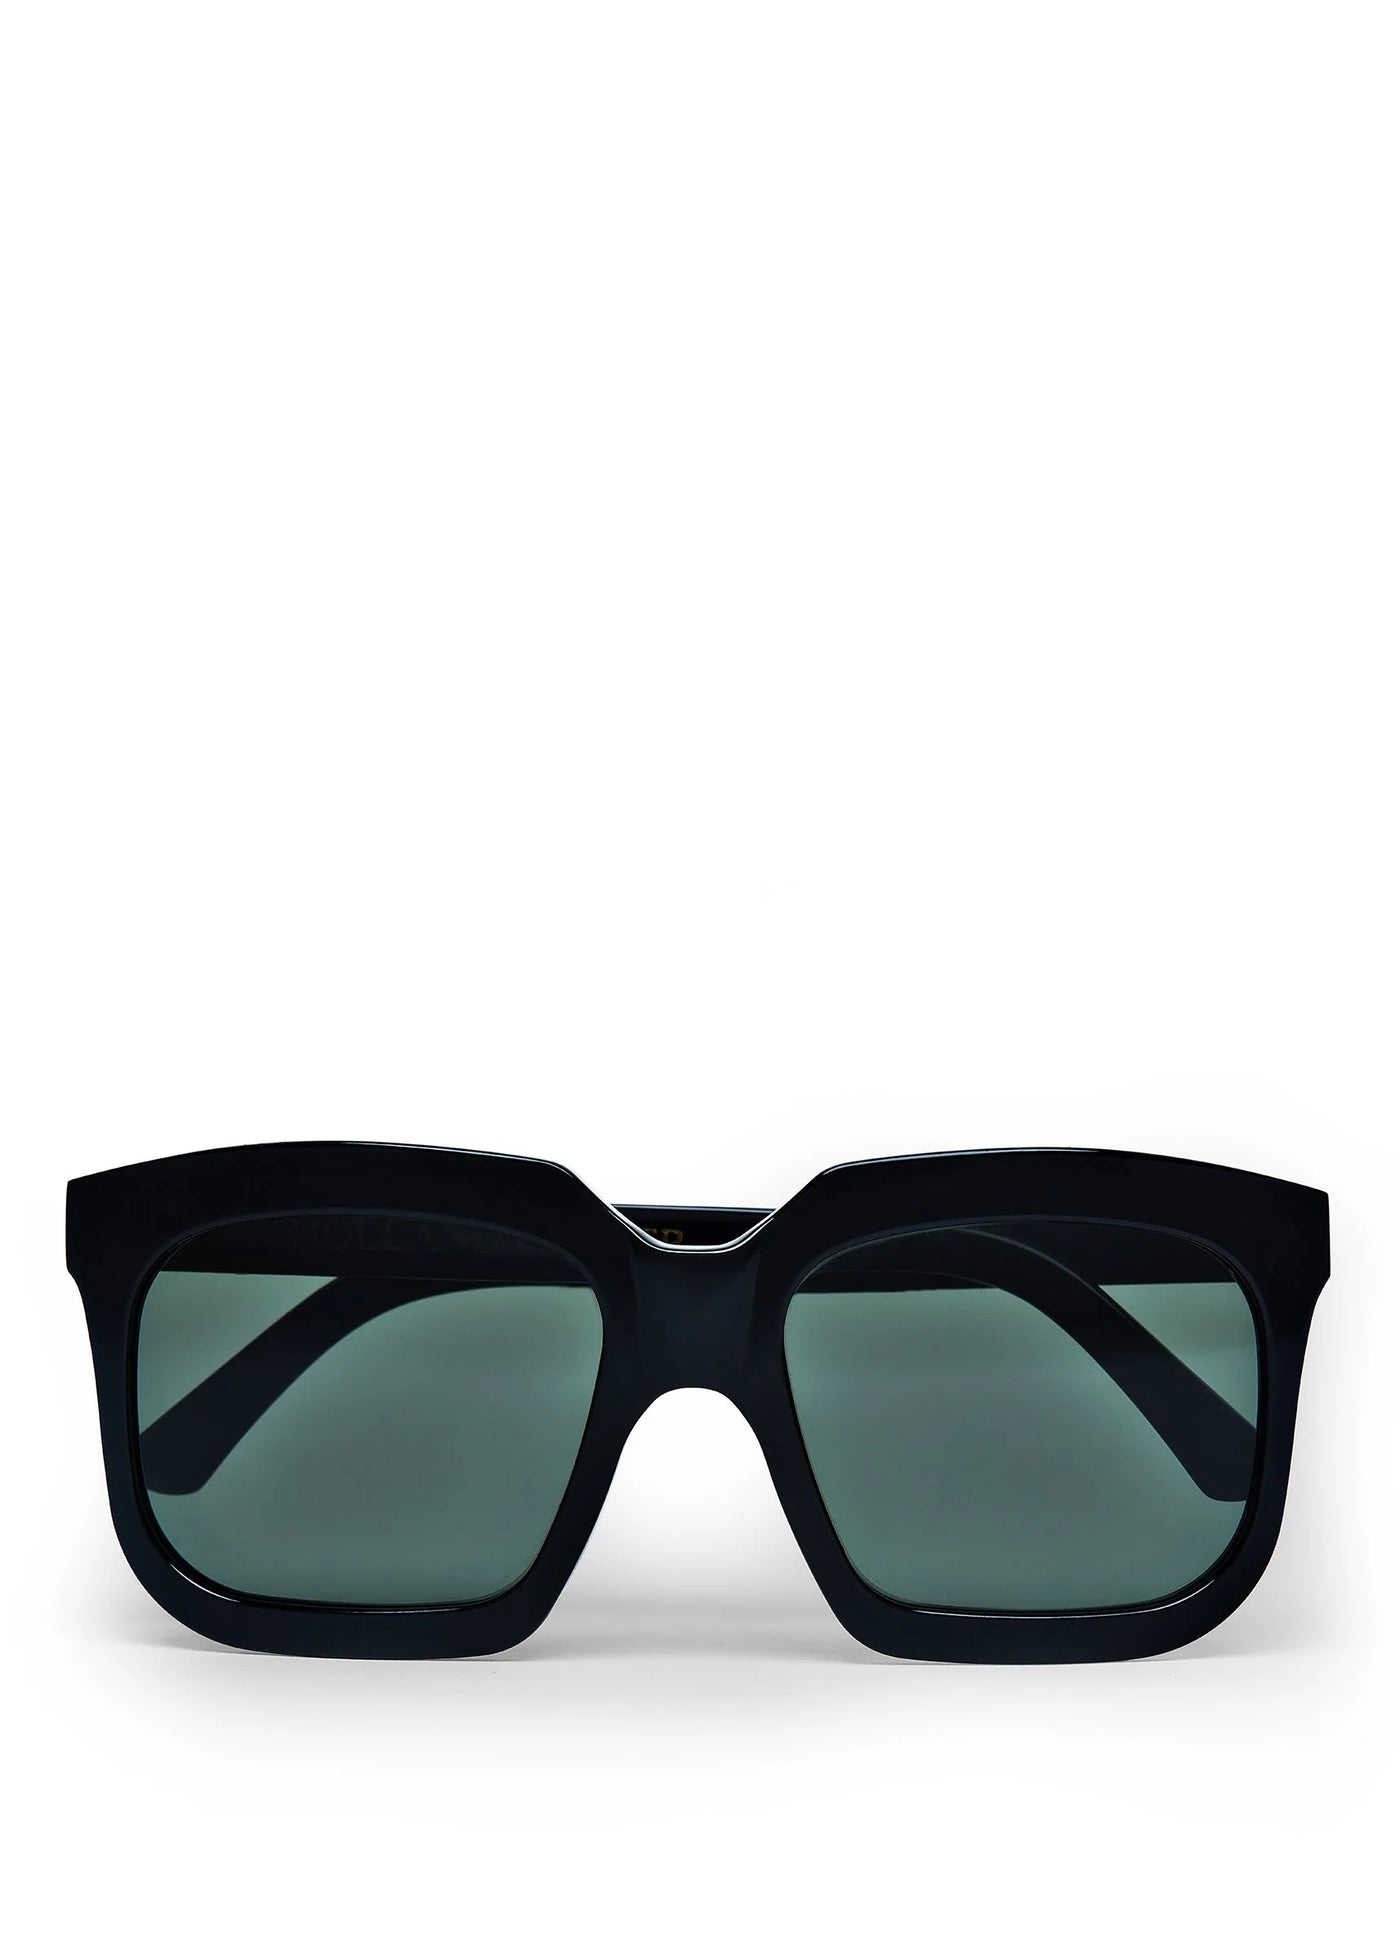 Holland Cooper City Sunglasses in Black Front